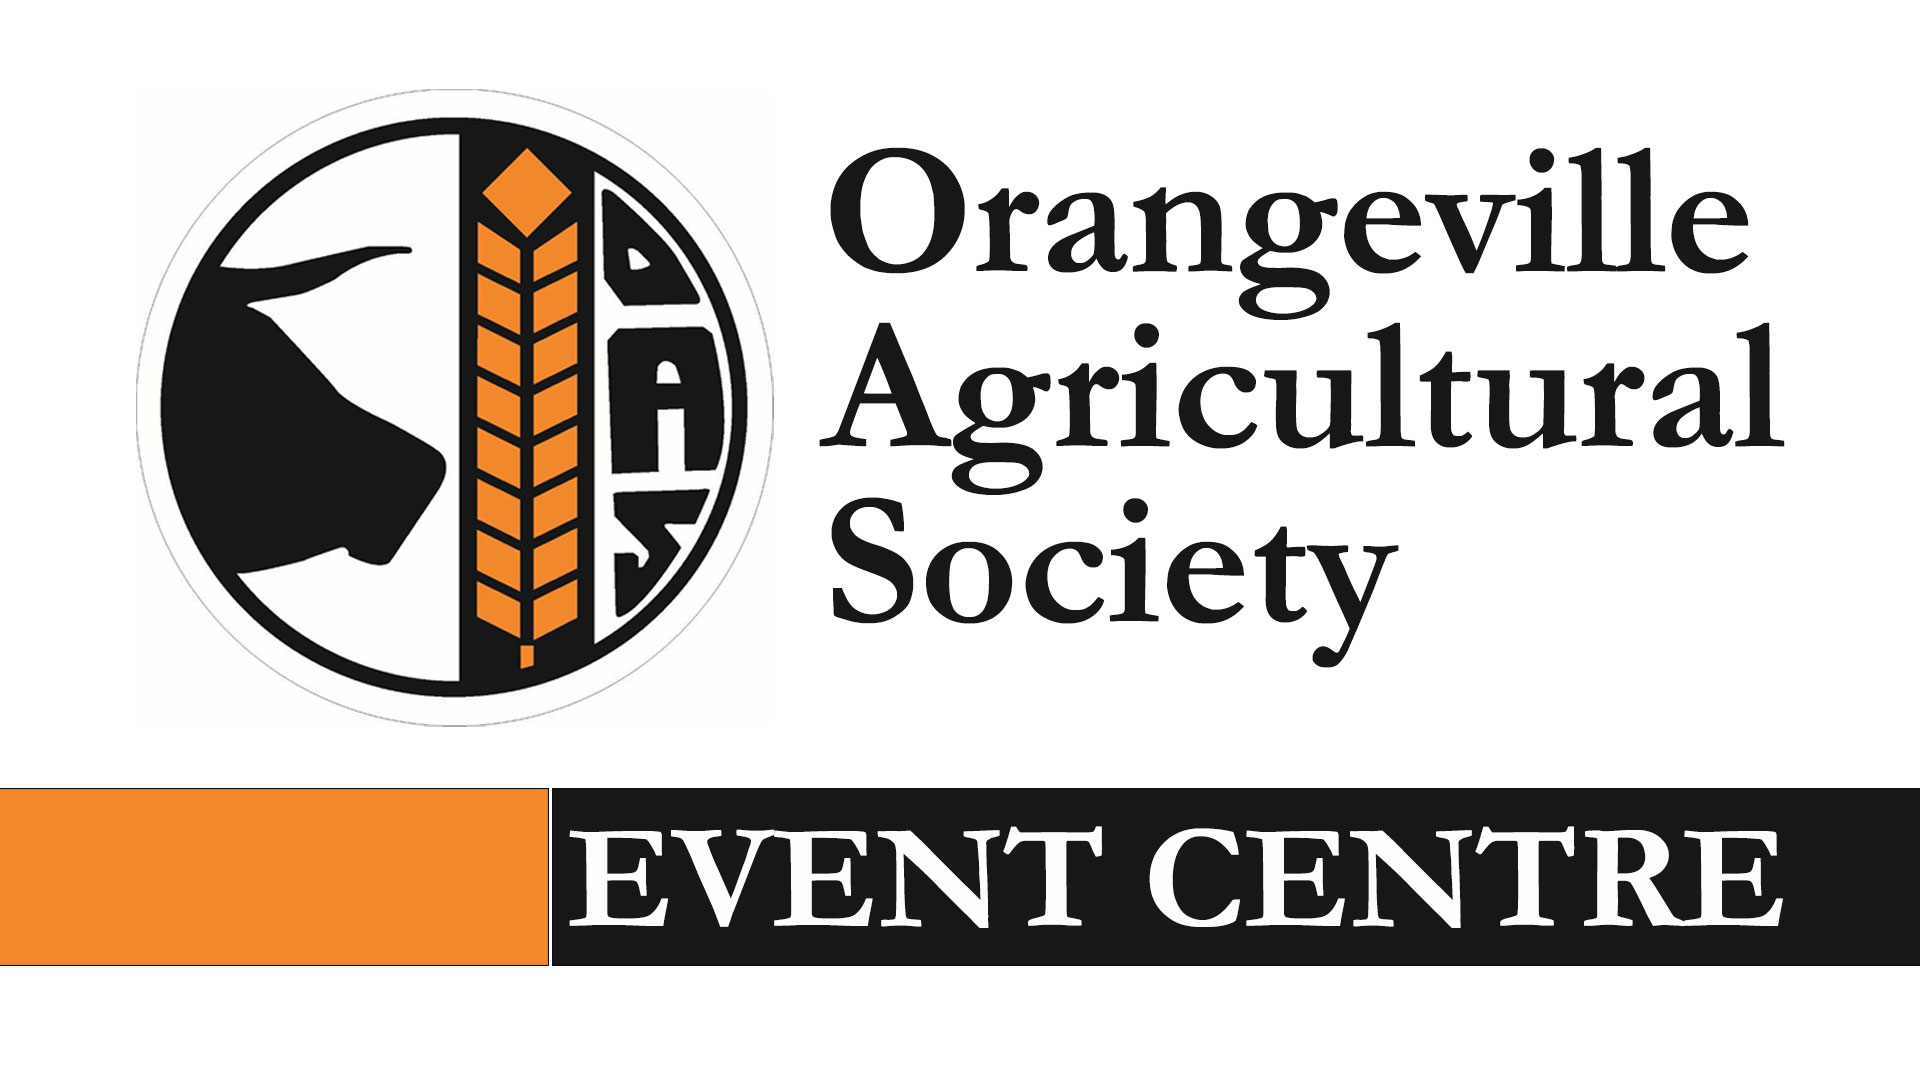 Orangeville Agricultural Society